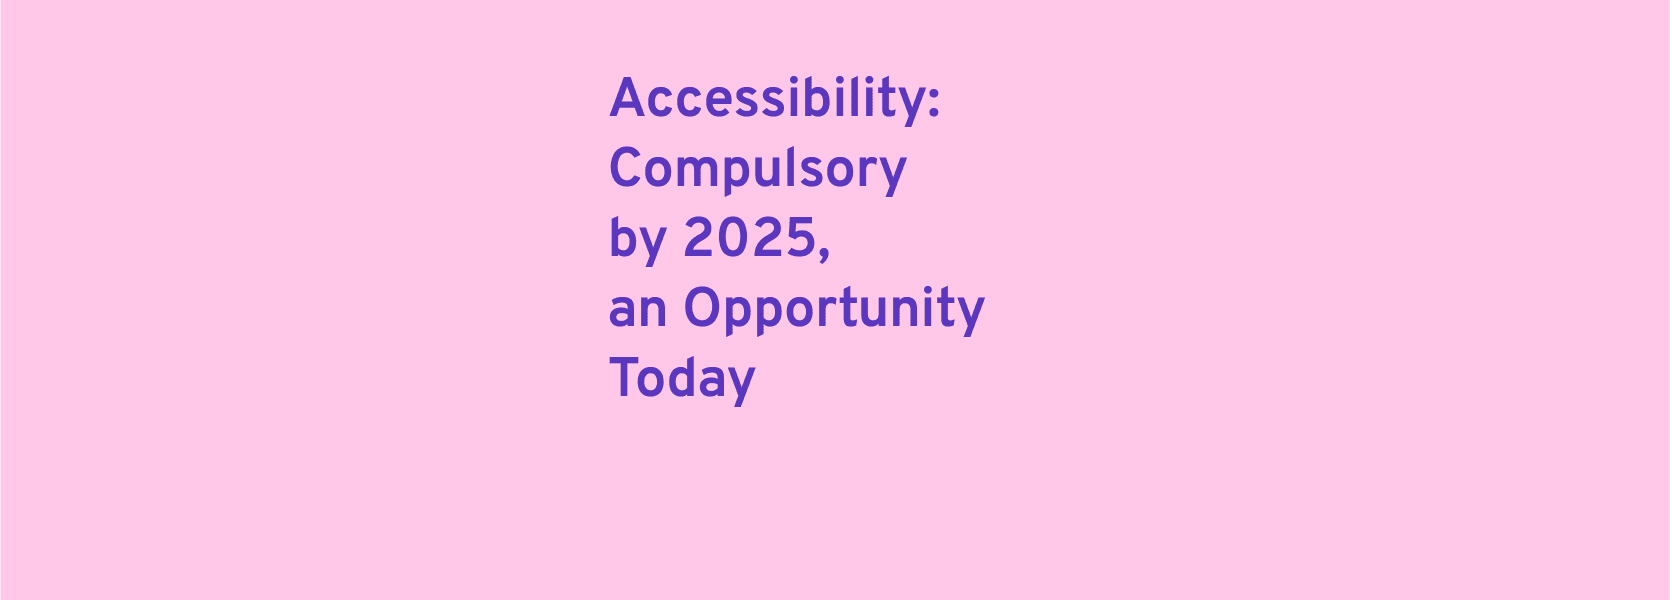 Purple text: "Accessibility: Compulsory by 2025, an opportunity today" on pink background